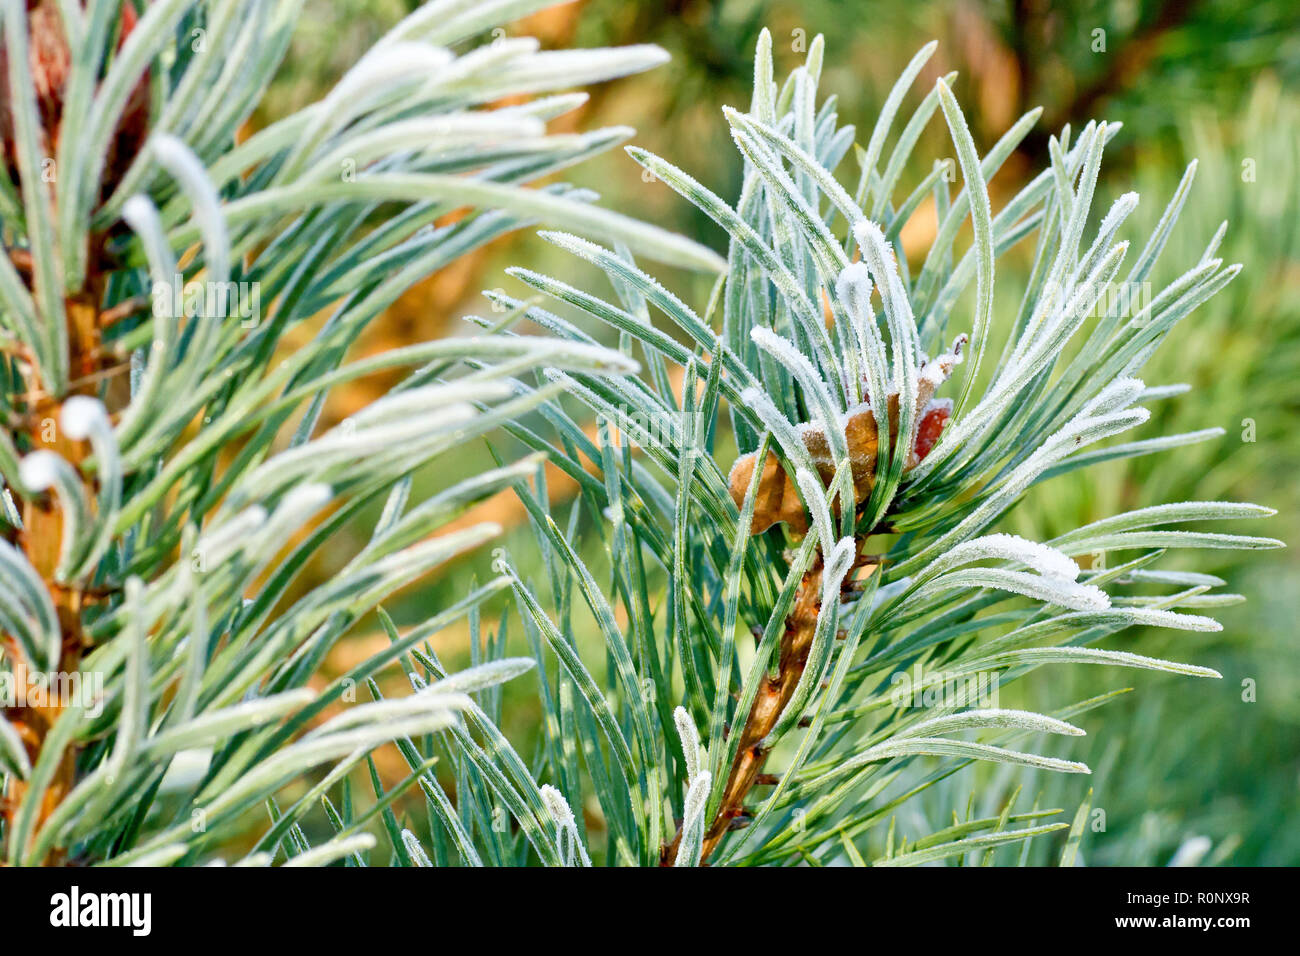 A Closeup Photo Of A Green Needle Pine Small Pine Cones At The Ends Of The  Branches Blurred Pine Needles In The Background Stock Photo - Download  Image Now - iStock